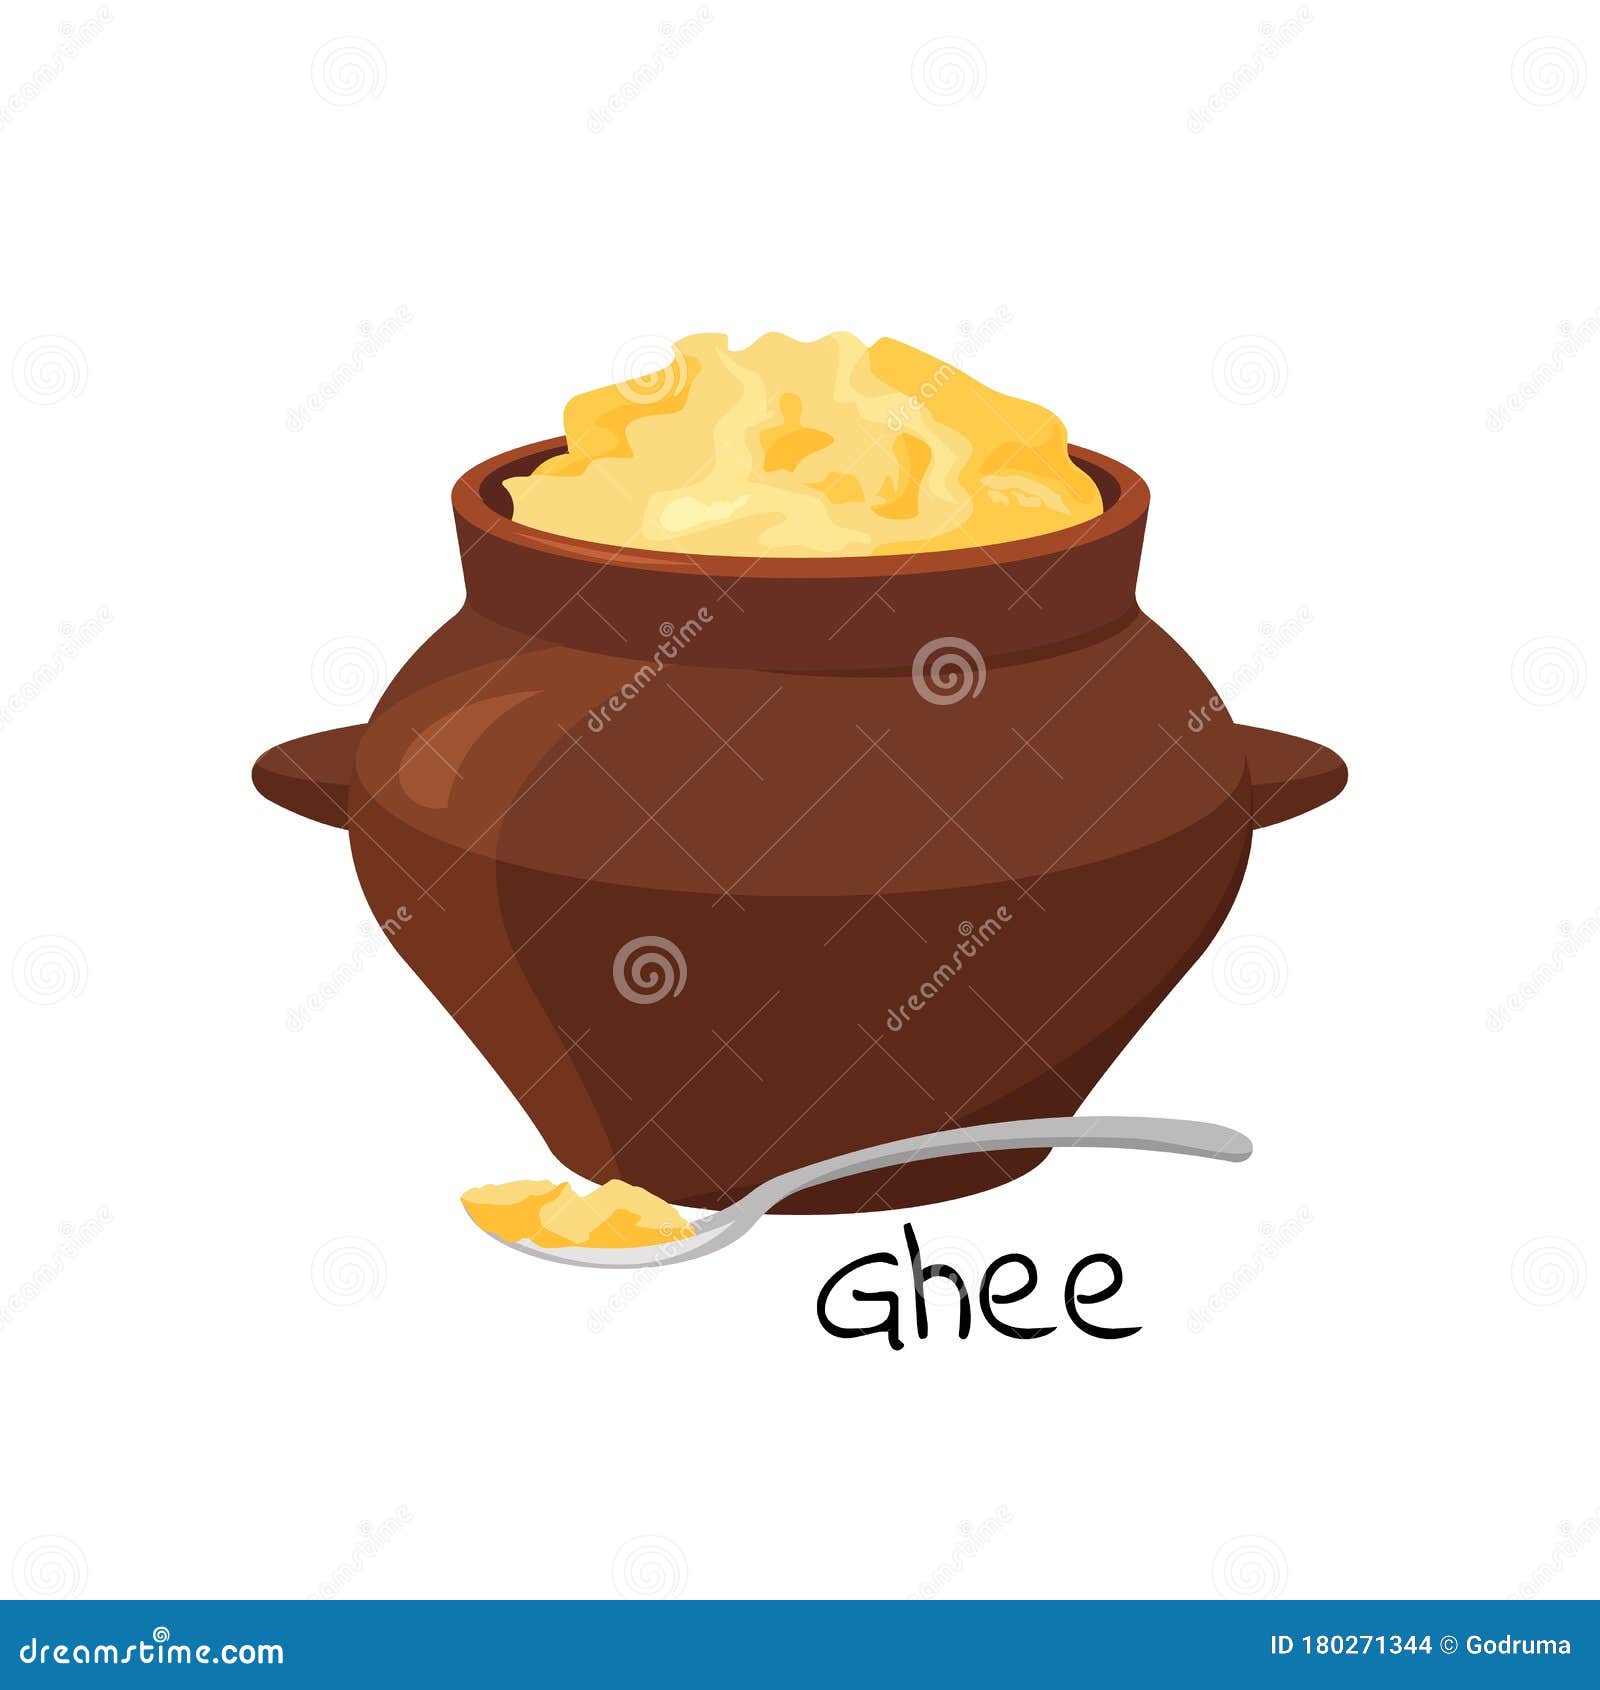 clarified ghee butter jar. food ingredient for cooking. 